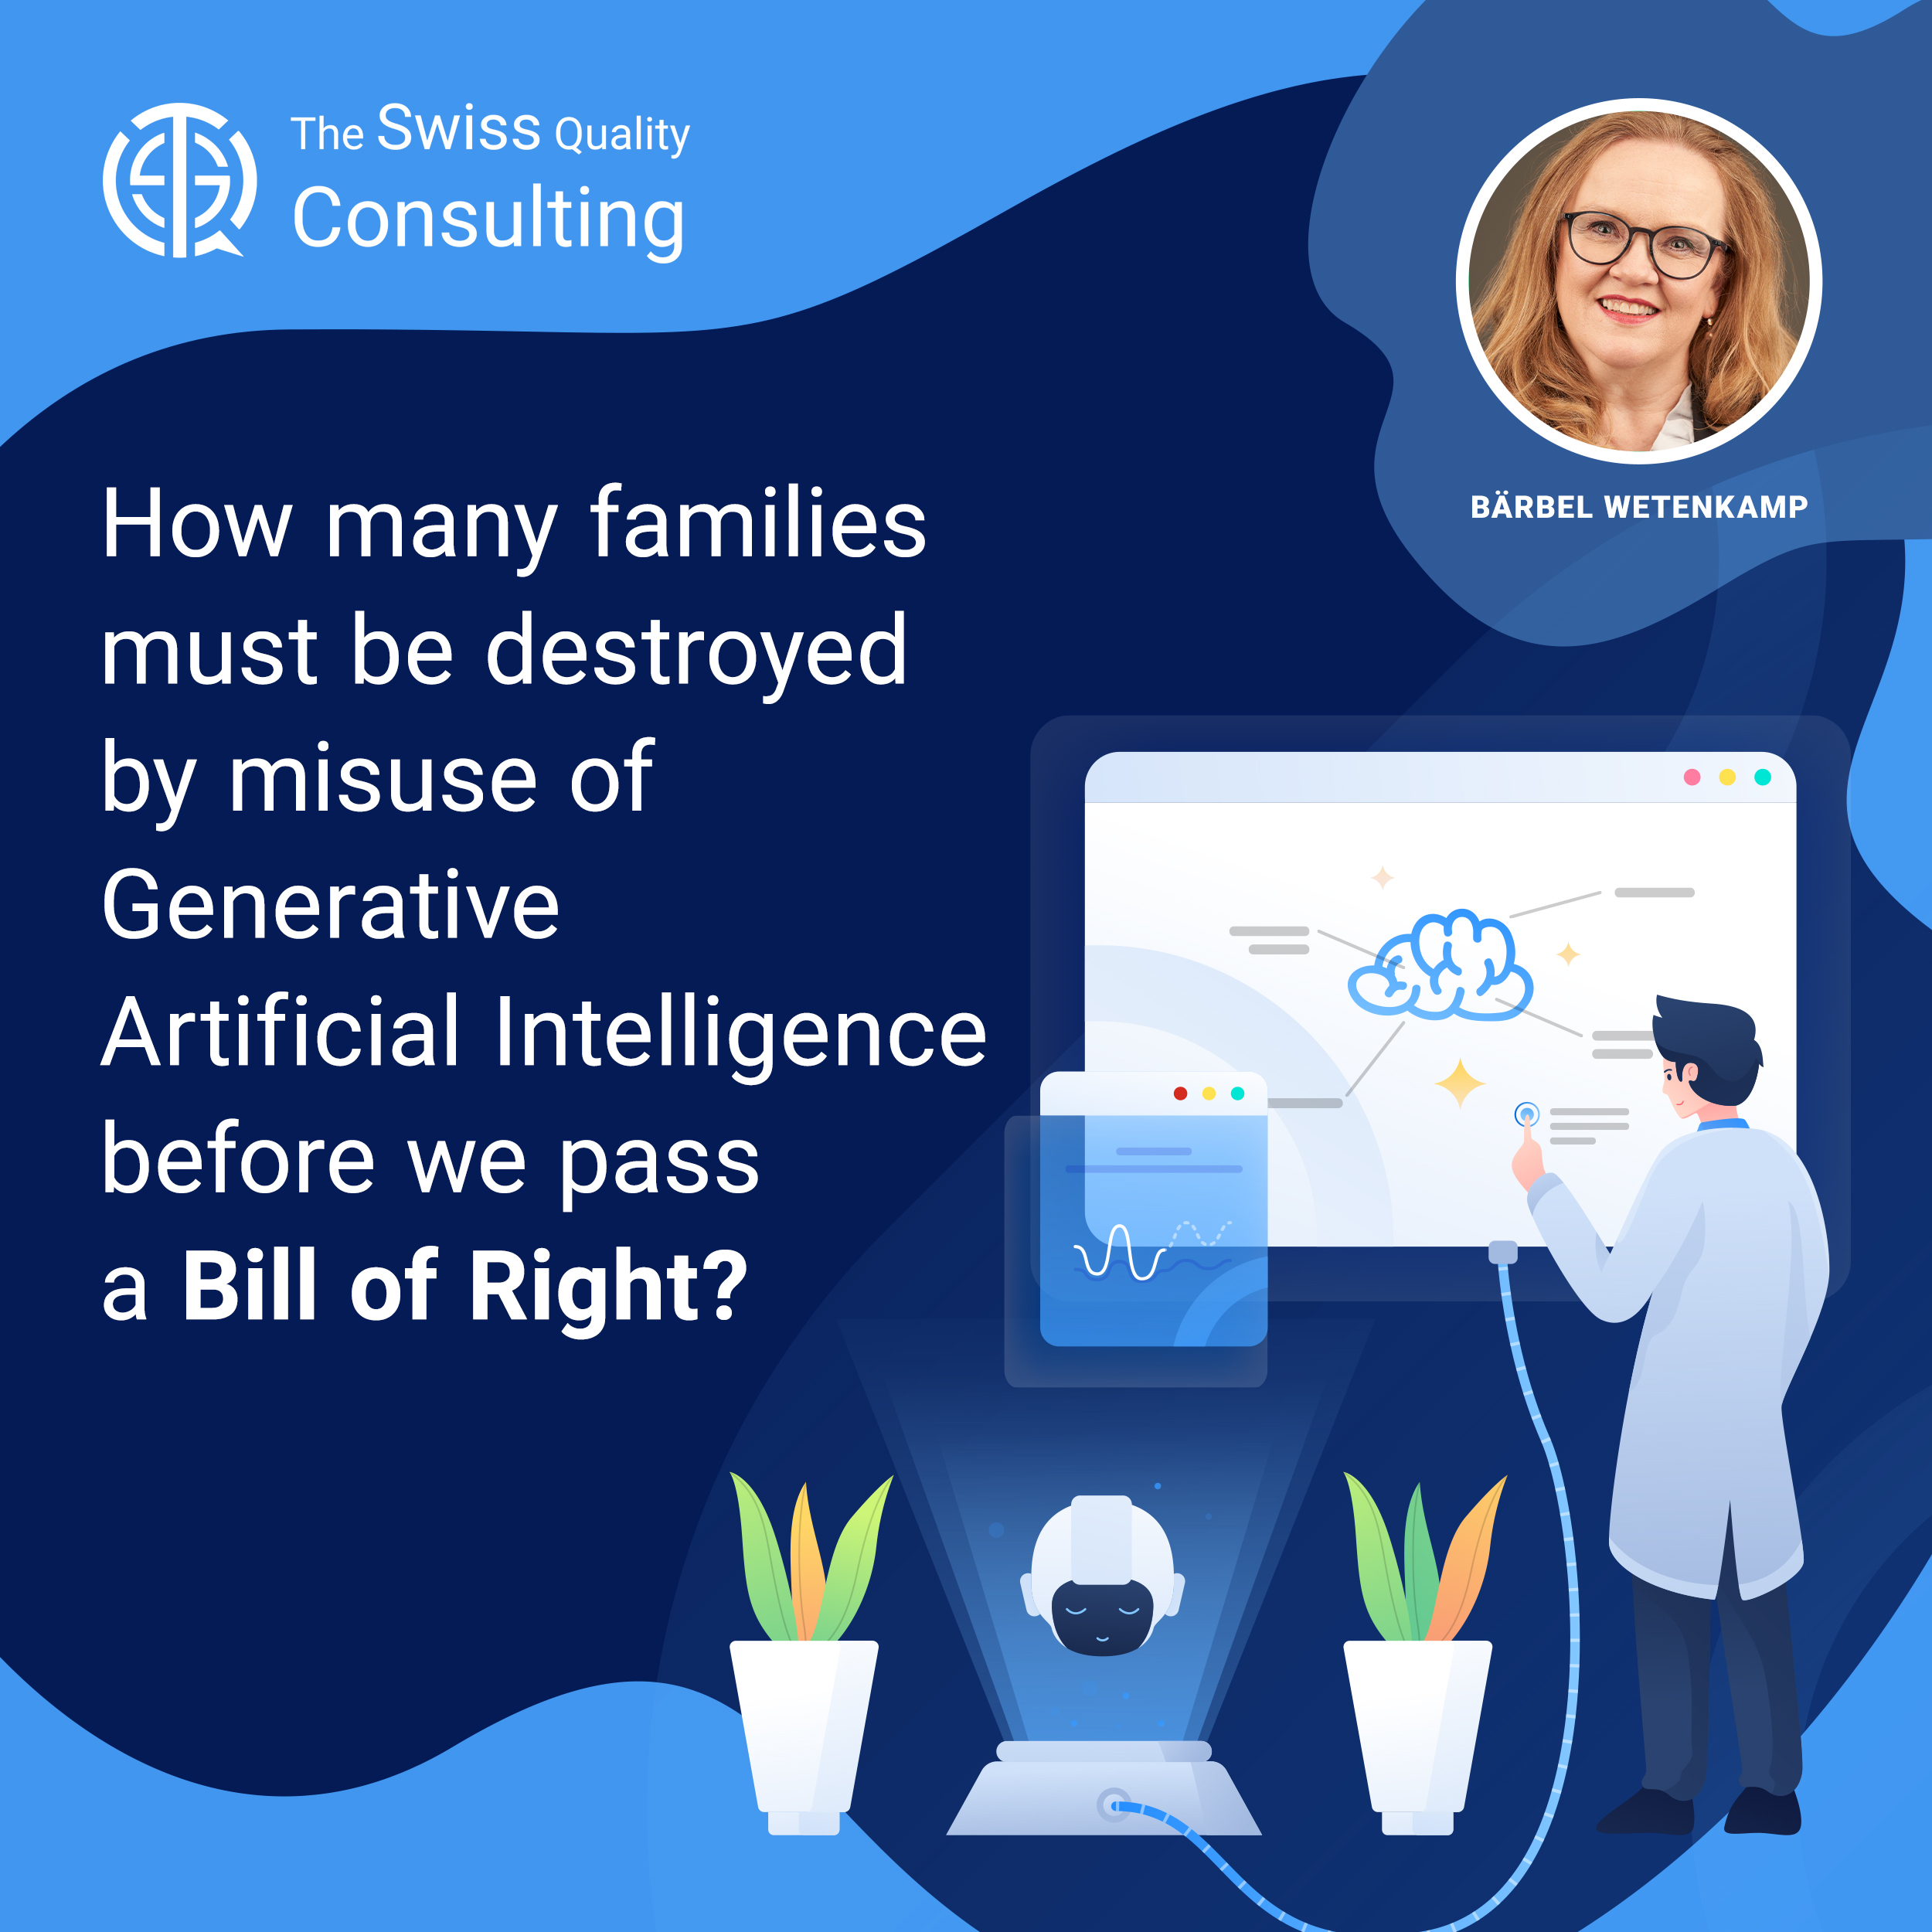 How many families must be destroyed by misuse of Generative Artificial Intelligence before we pass a Bill of Right? 